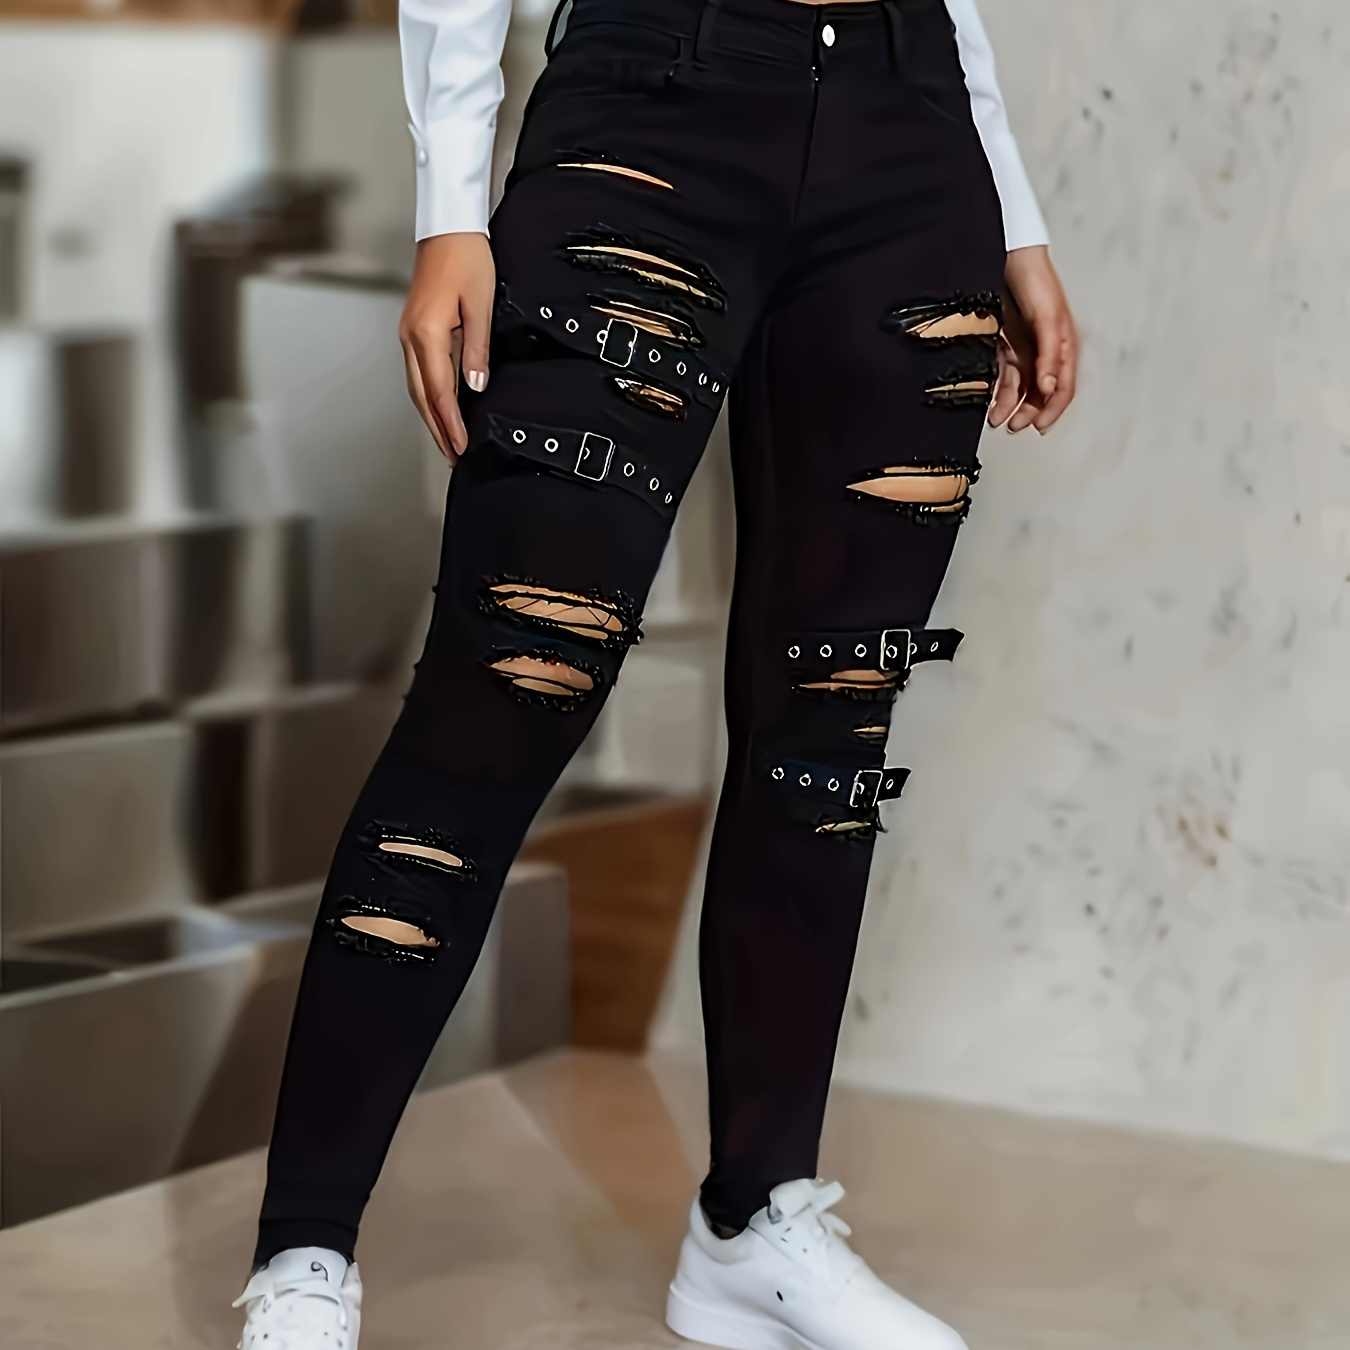 

Women's High-waisted Garter Decor Ripped Skinny Jeans, Fashionable Stretch Denim Pants, Versatile Casual Style, Trendy Streetwear